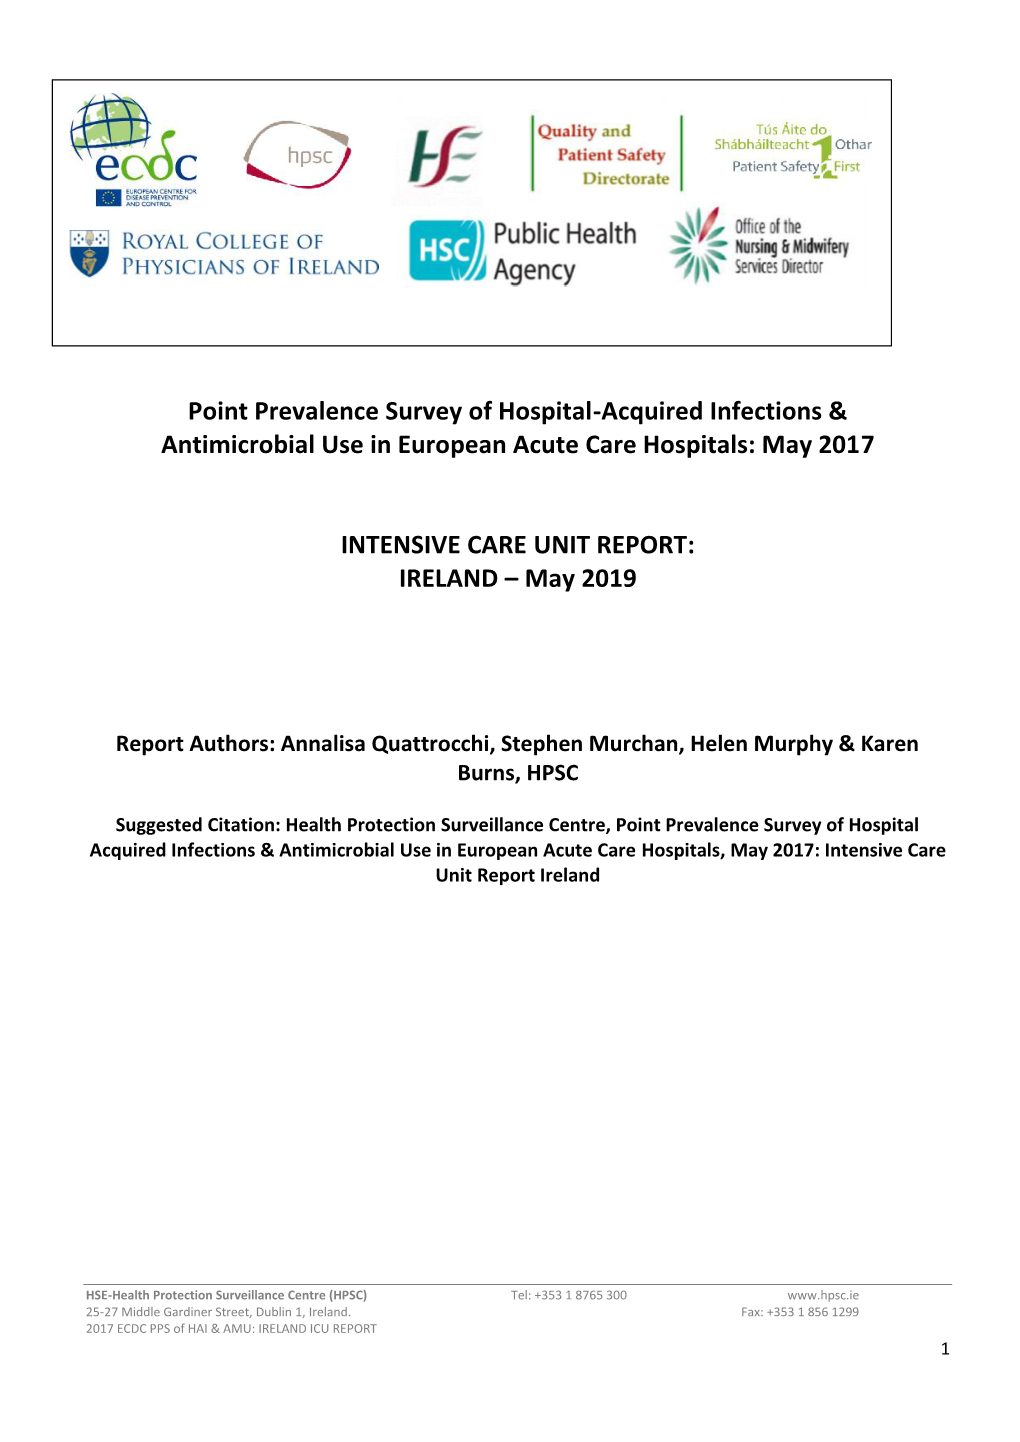 Point Prevalence Survey of Hospital-Acquired Infections & Antimicrobial Use in European Acute Care Hospitals: May 2017